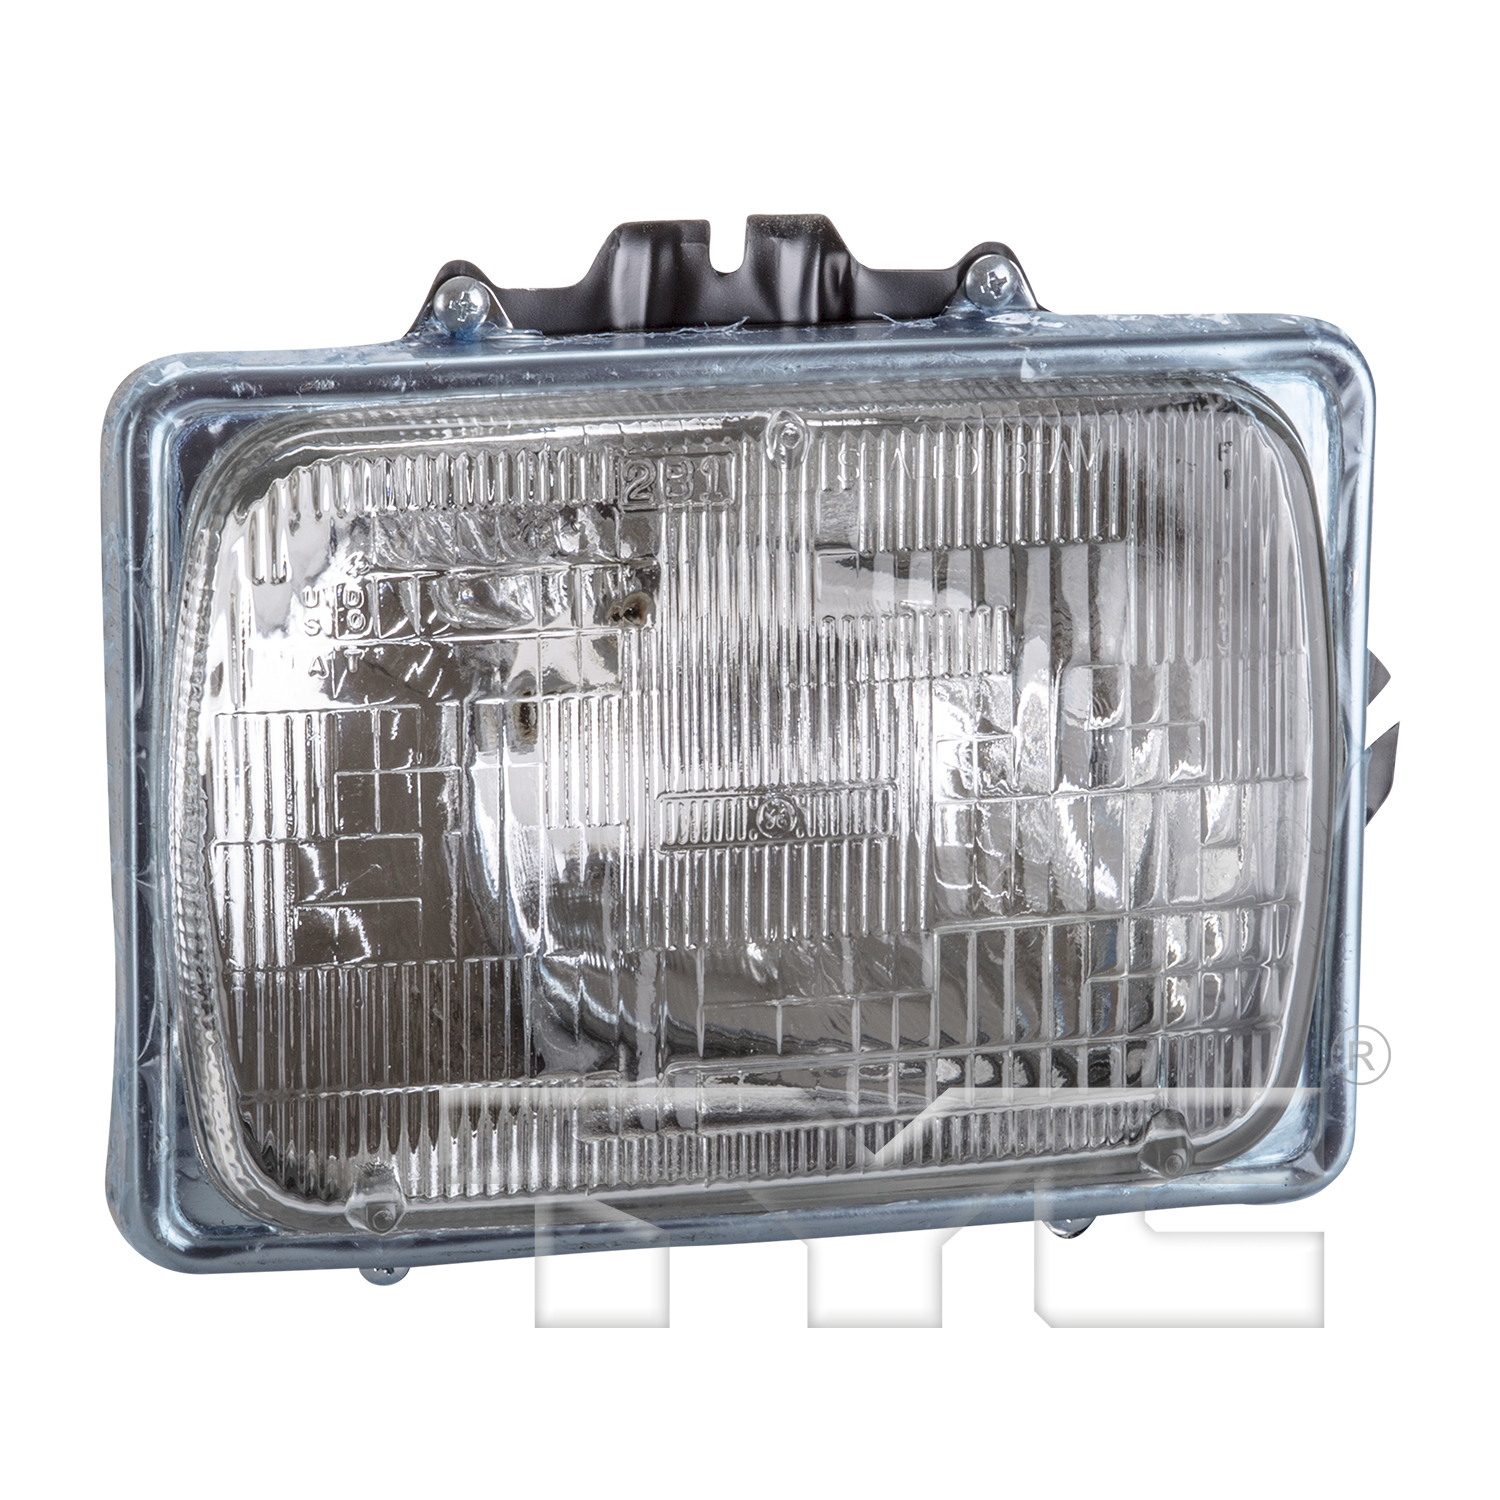 Aftermarket HEADLIGHTS for FORD - E-450 SUPER DUTY, E-450 SUPER DUTY,03-07,RT Headlamp assy sealed beam